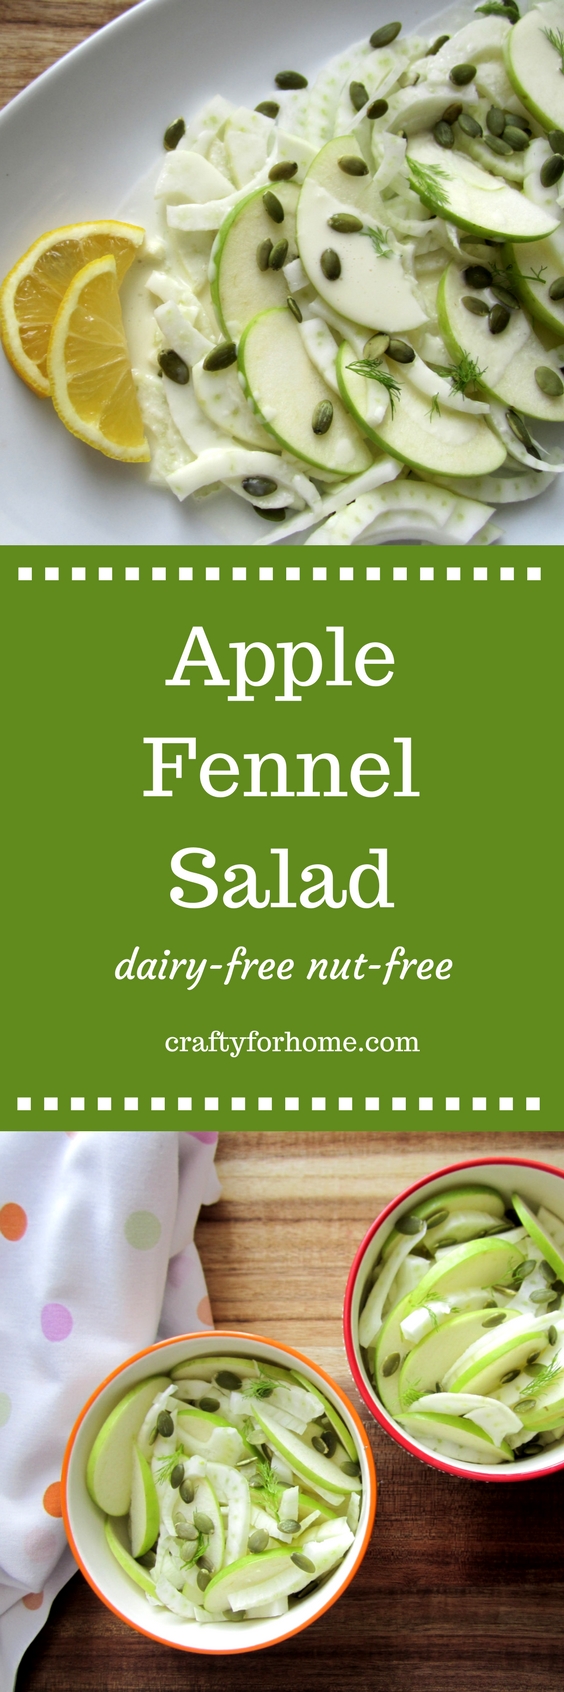 Apple Fennel Salad | This salad is fresh and comforting. If you like fennel, you will know that licorice taste is refreshing. #dairyfree #nutfree #applefennelsalad for full recipe on www.craftyforhome.com.